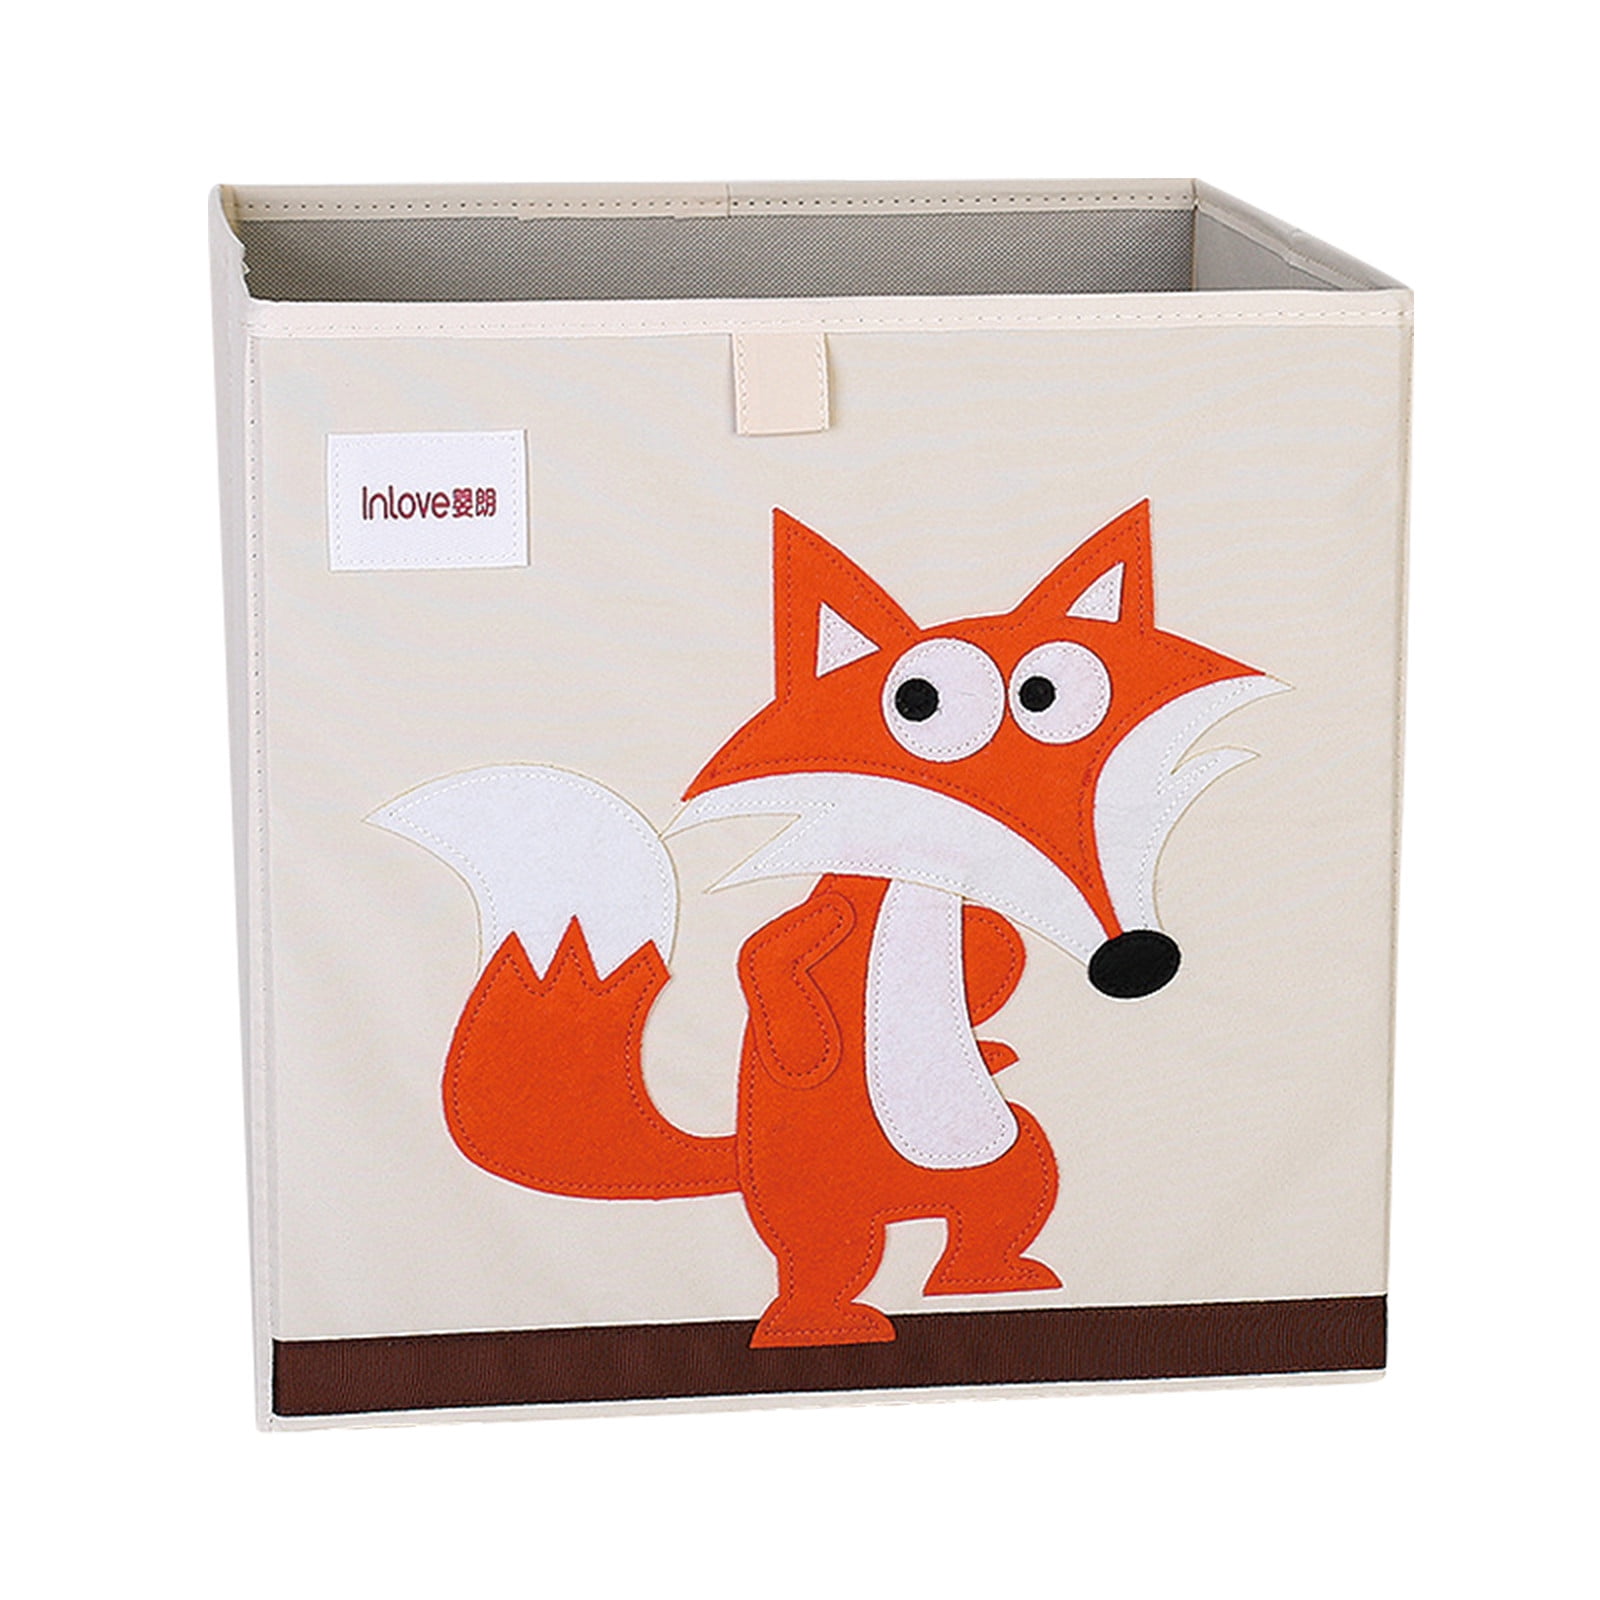 Details about   CHILDREN STORAGE BOX KIDS ORGANISER CUBE TOYS BOOKS LAUNDRY SHOES CLEAN UP SPACE 